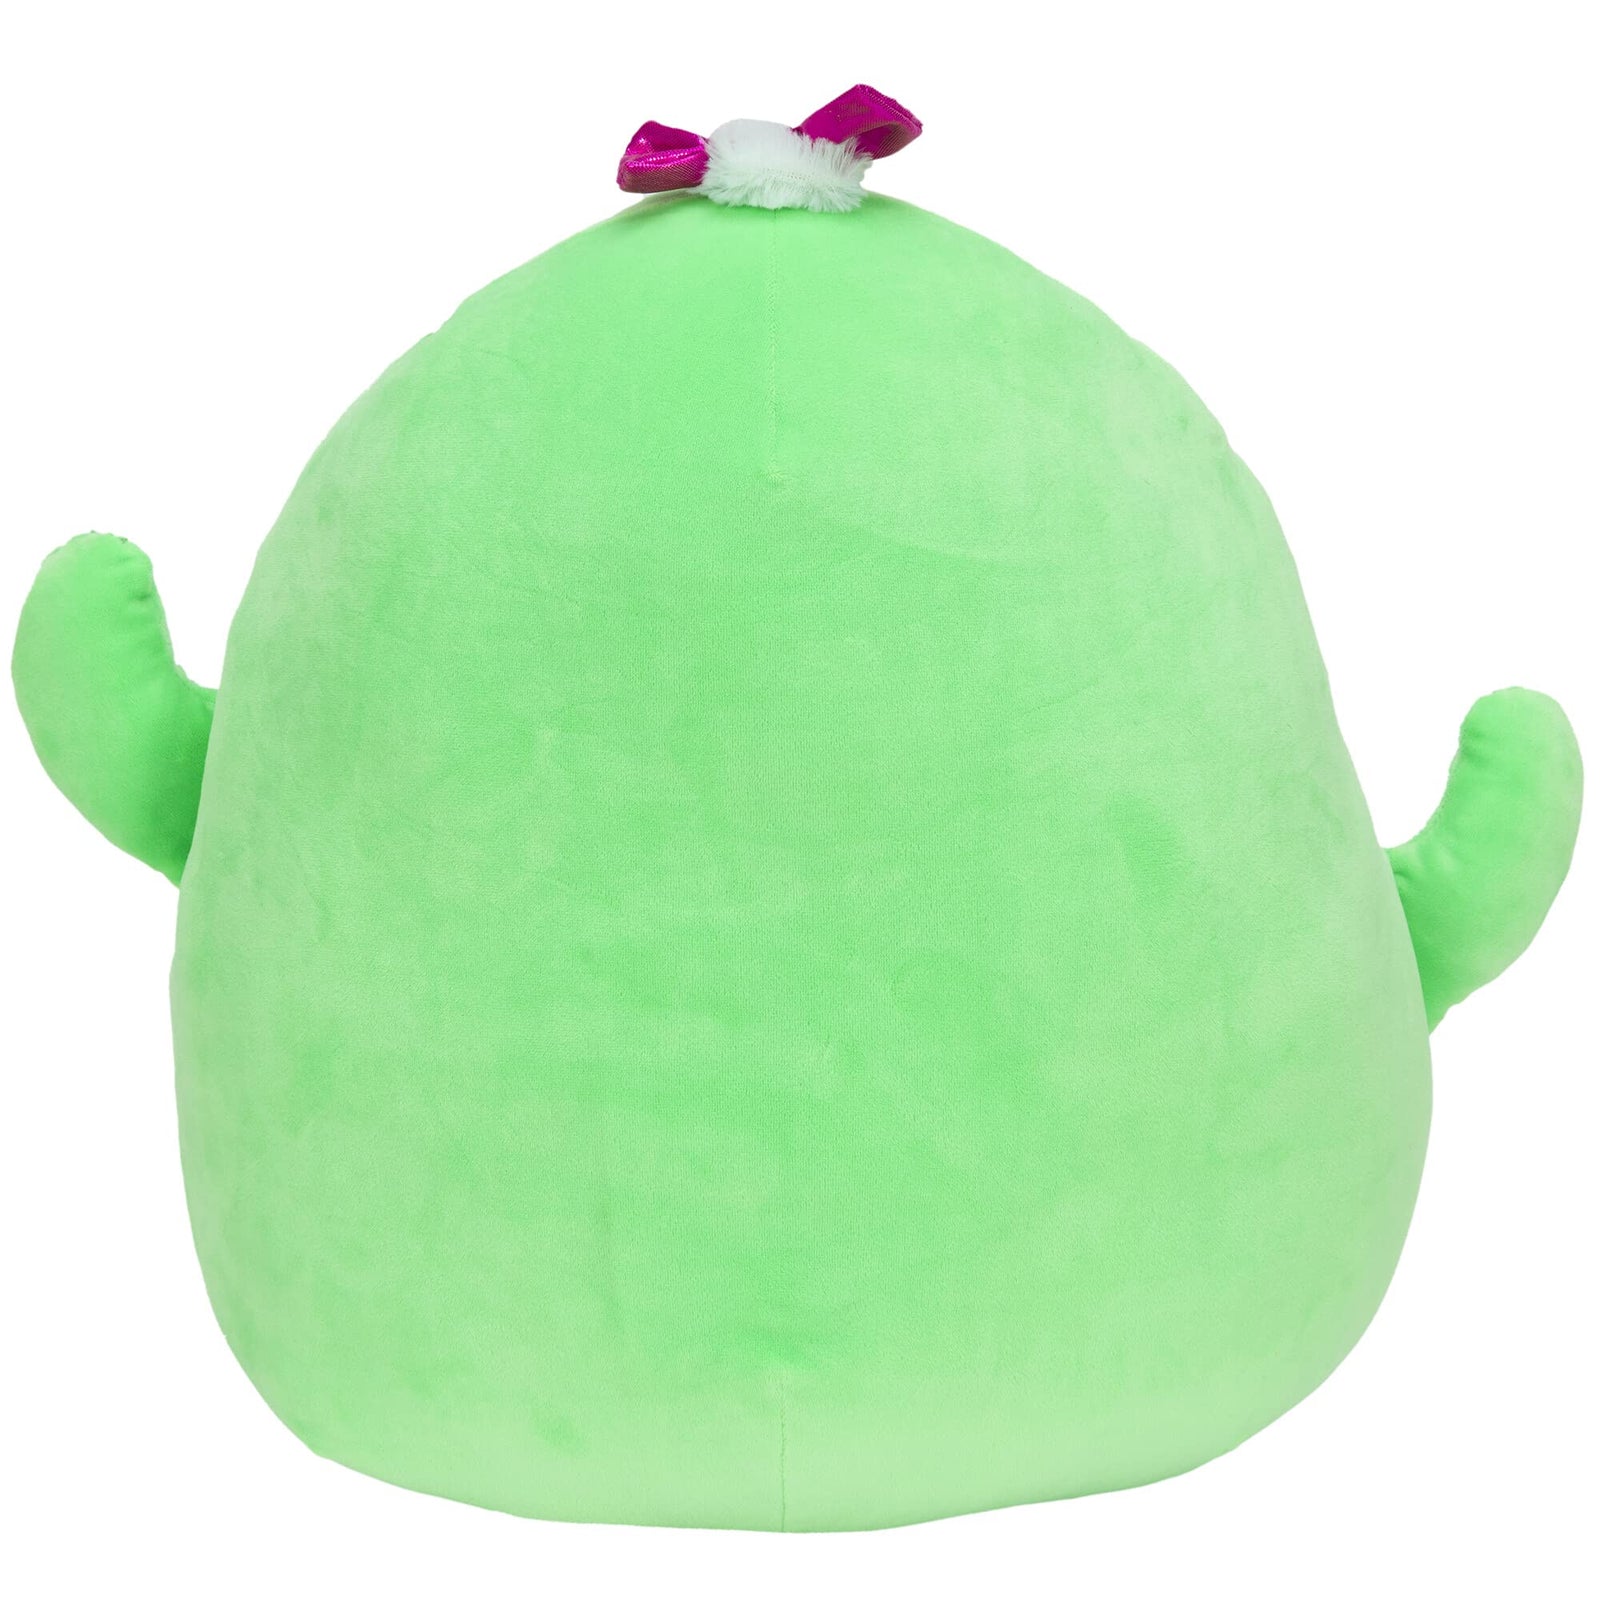 Squishmallow 16-Inch Cactus - Add Maritza to Your Squad, Ultrasoft Stuffed Animal Large Plush Toy, Official Kellytoy Plush